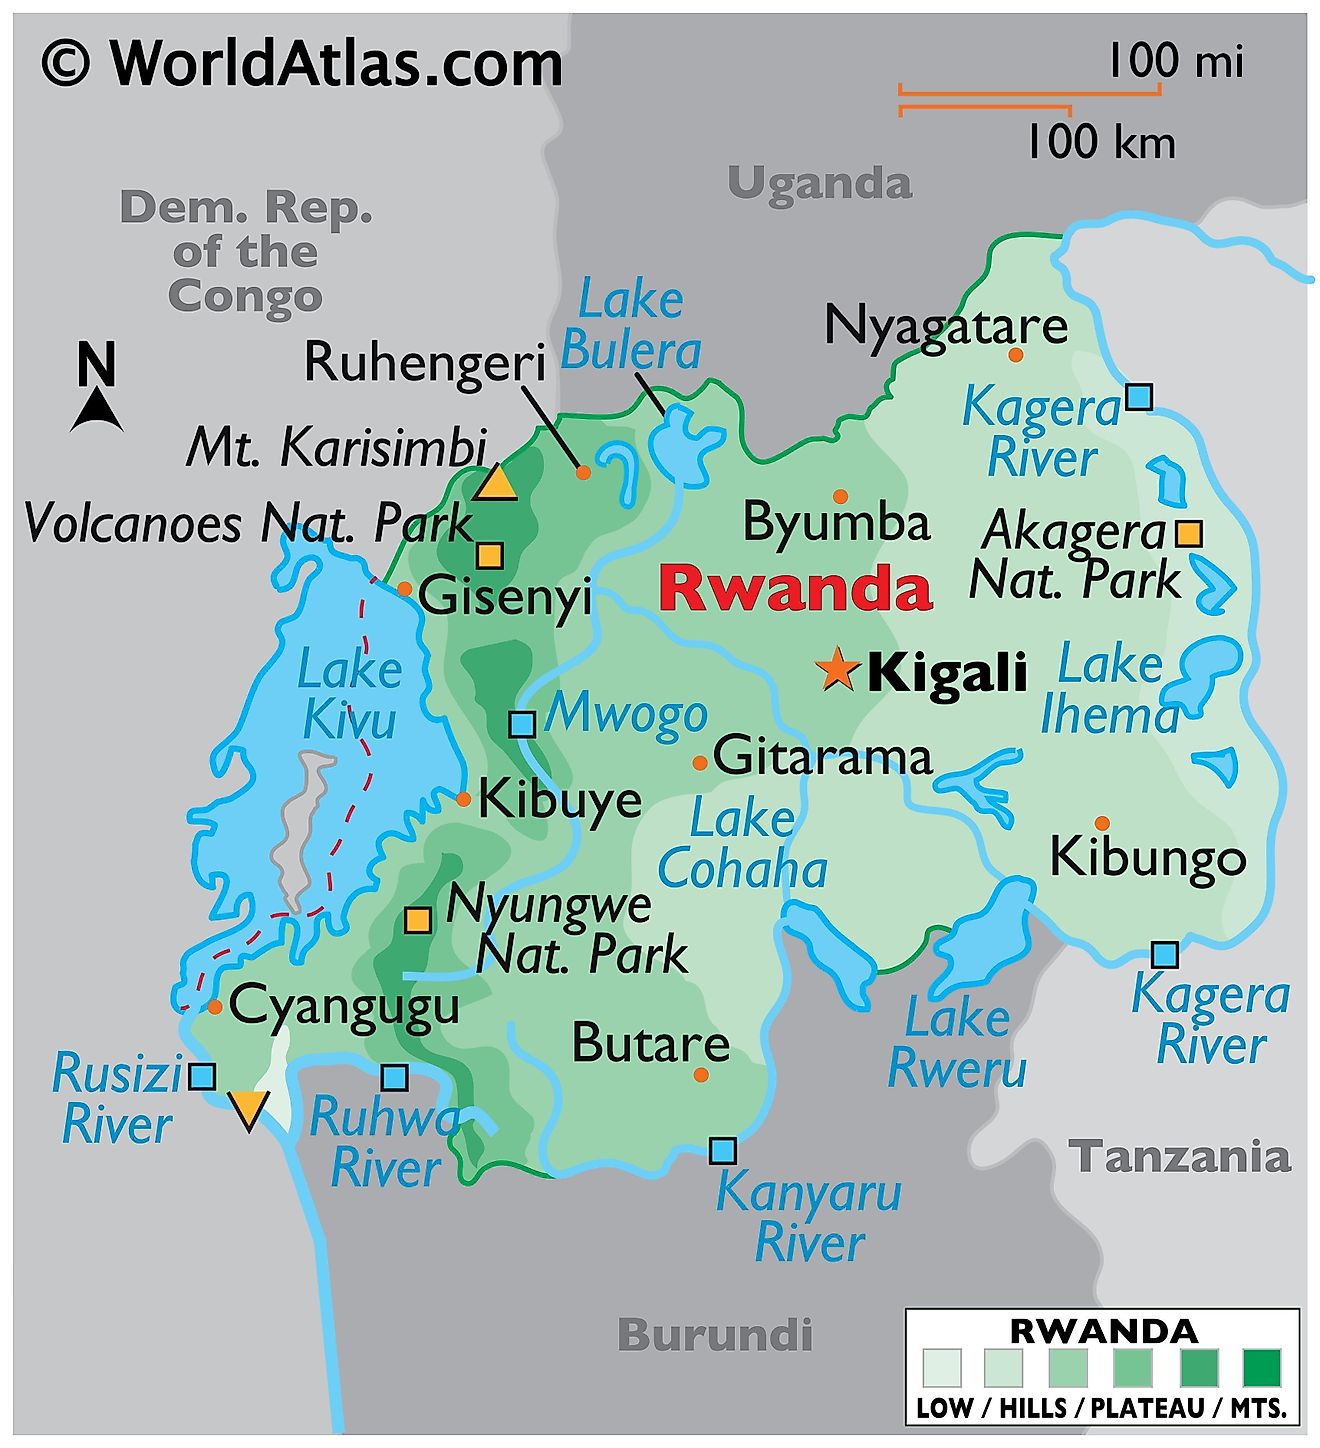 Physical Map of Rwanda with state boundaries. It shows the physical features of Rwanda including terrain, major rivers, mountains, lakes, cities, and protected areas.